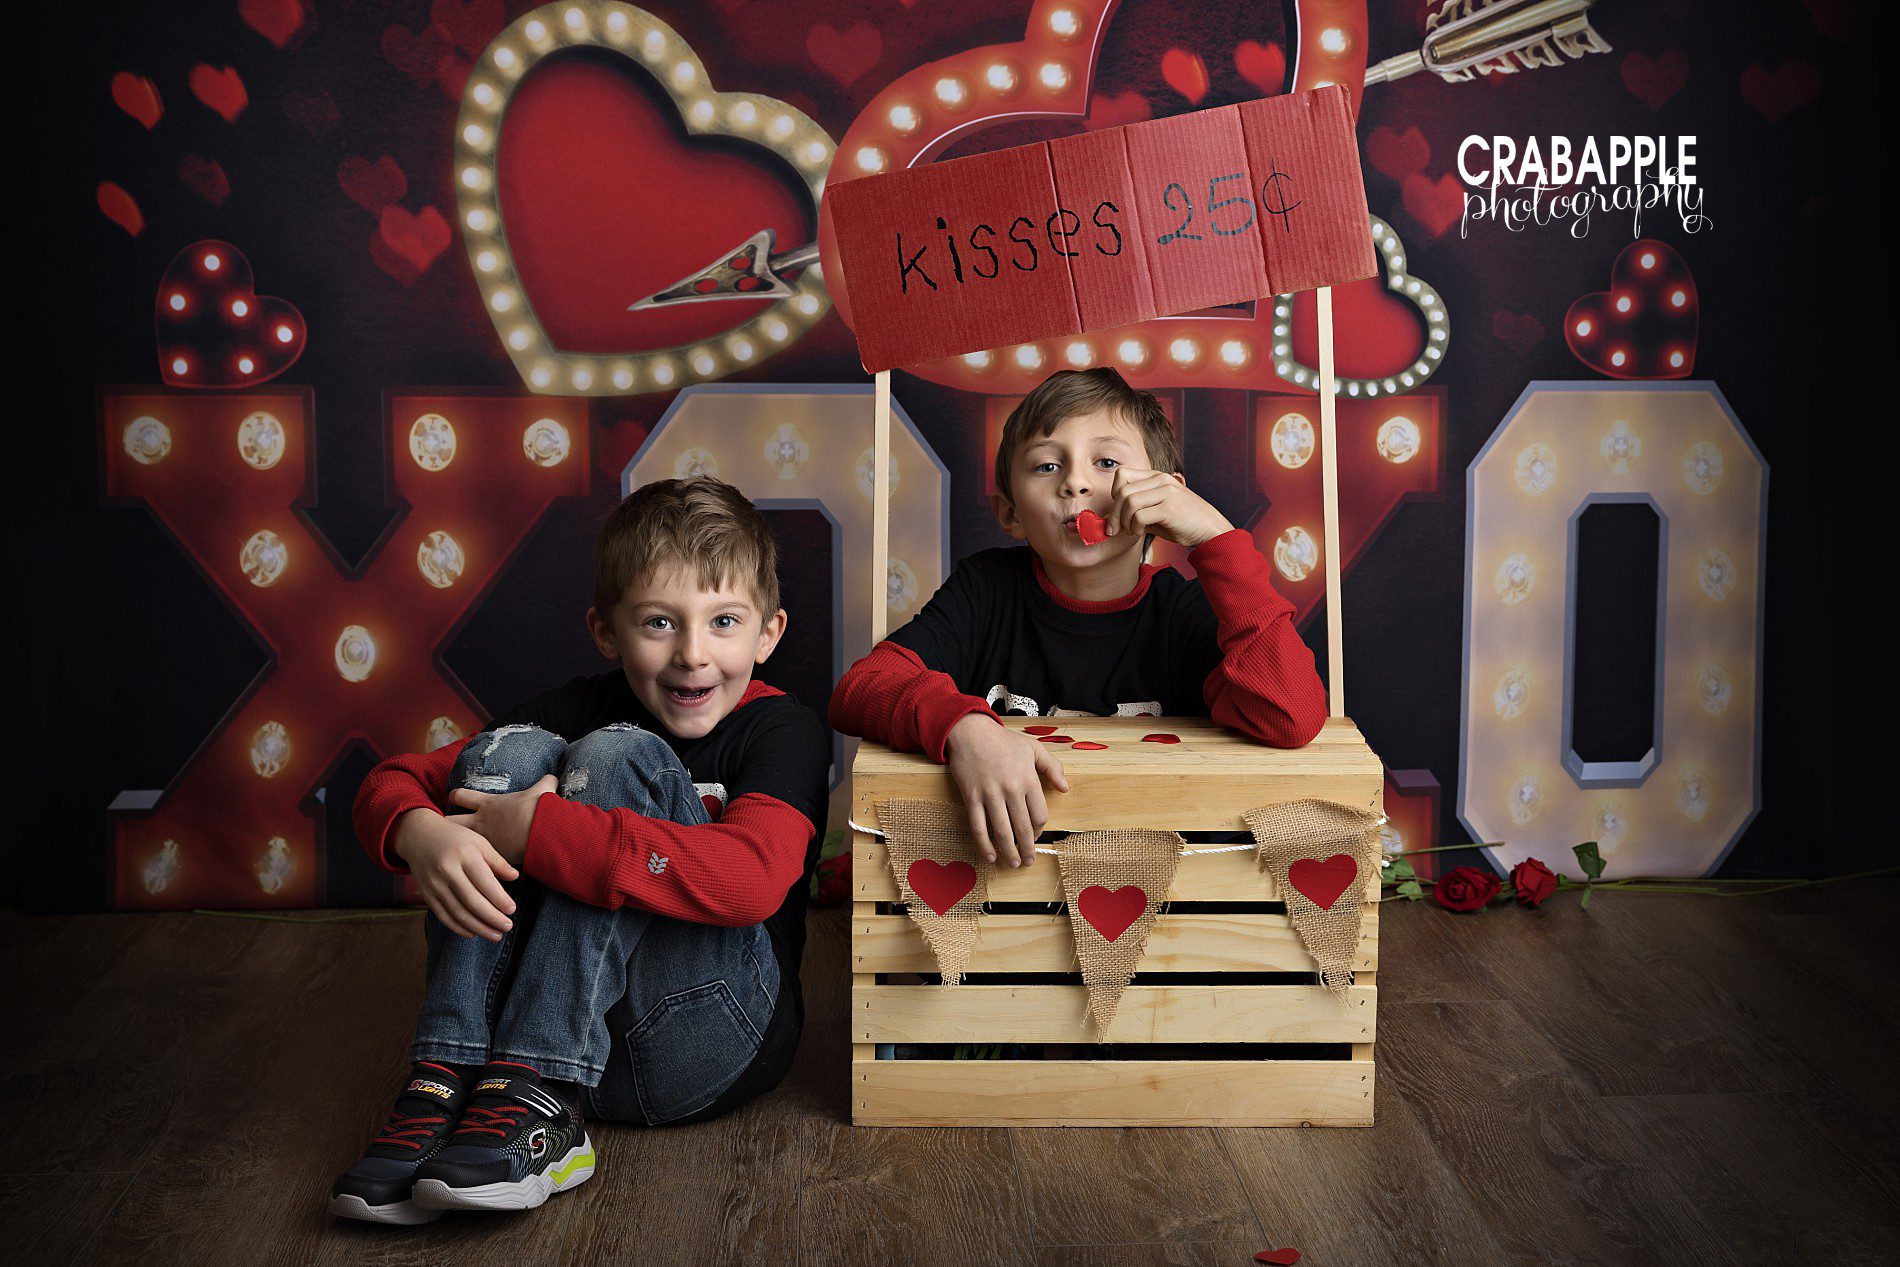 funny valentine's day photos for kids with kissing booth